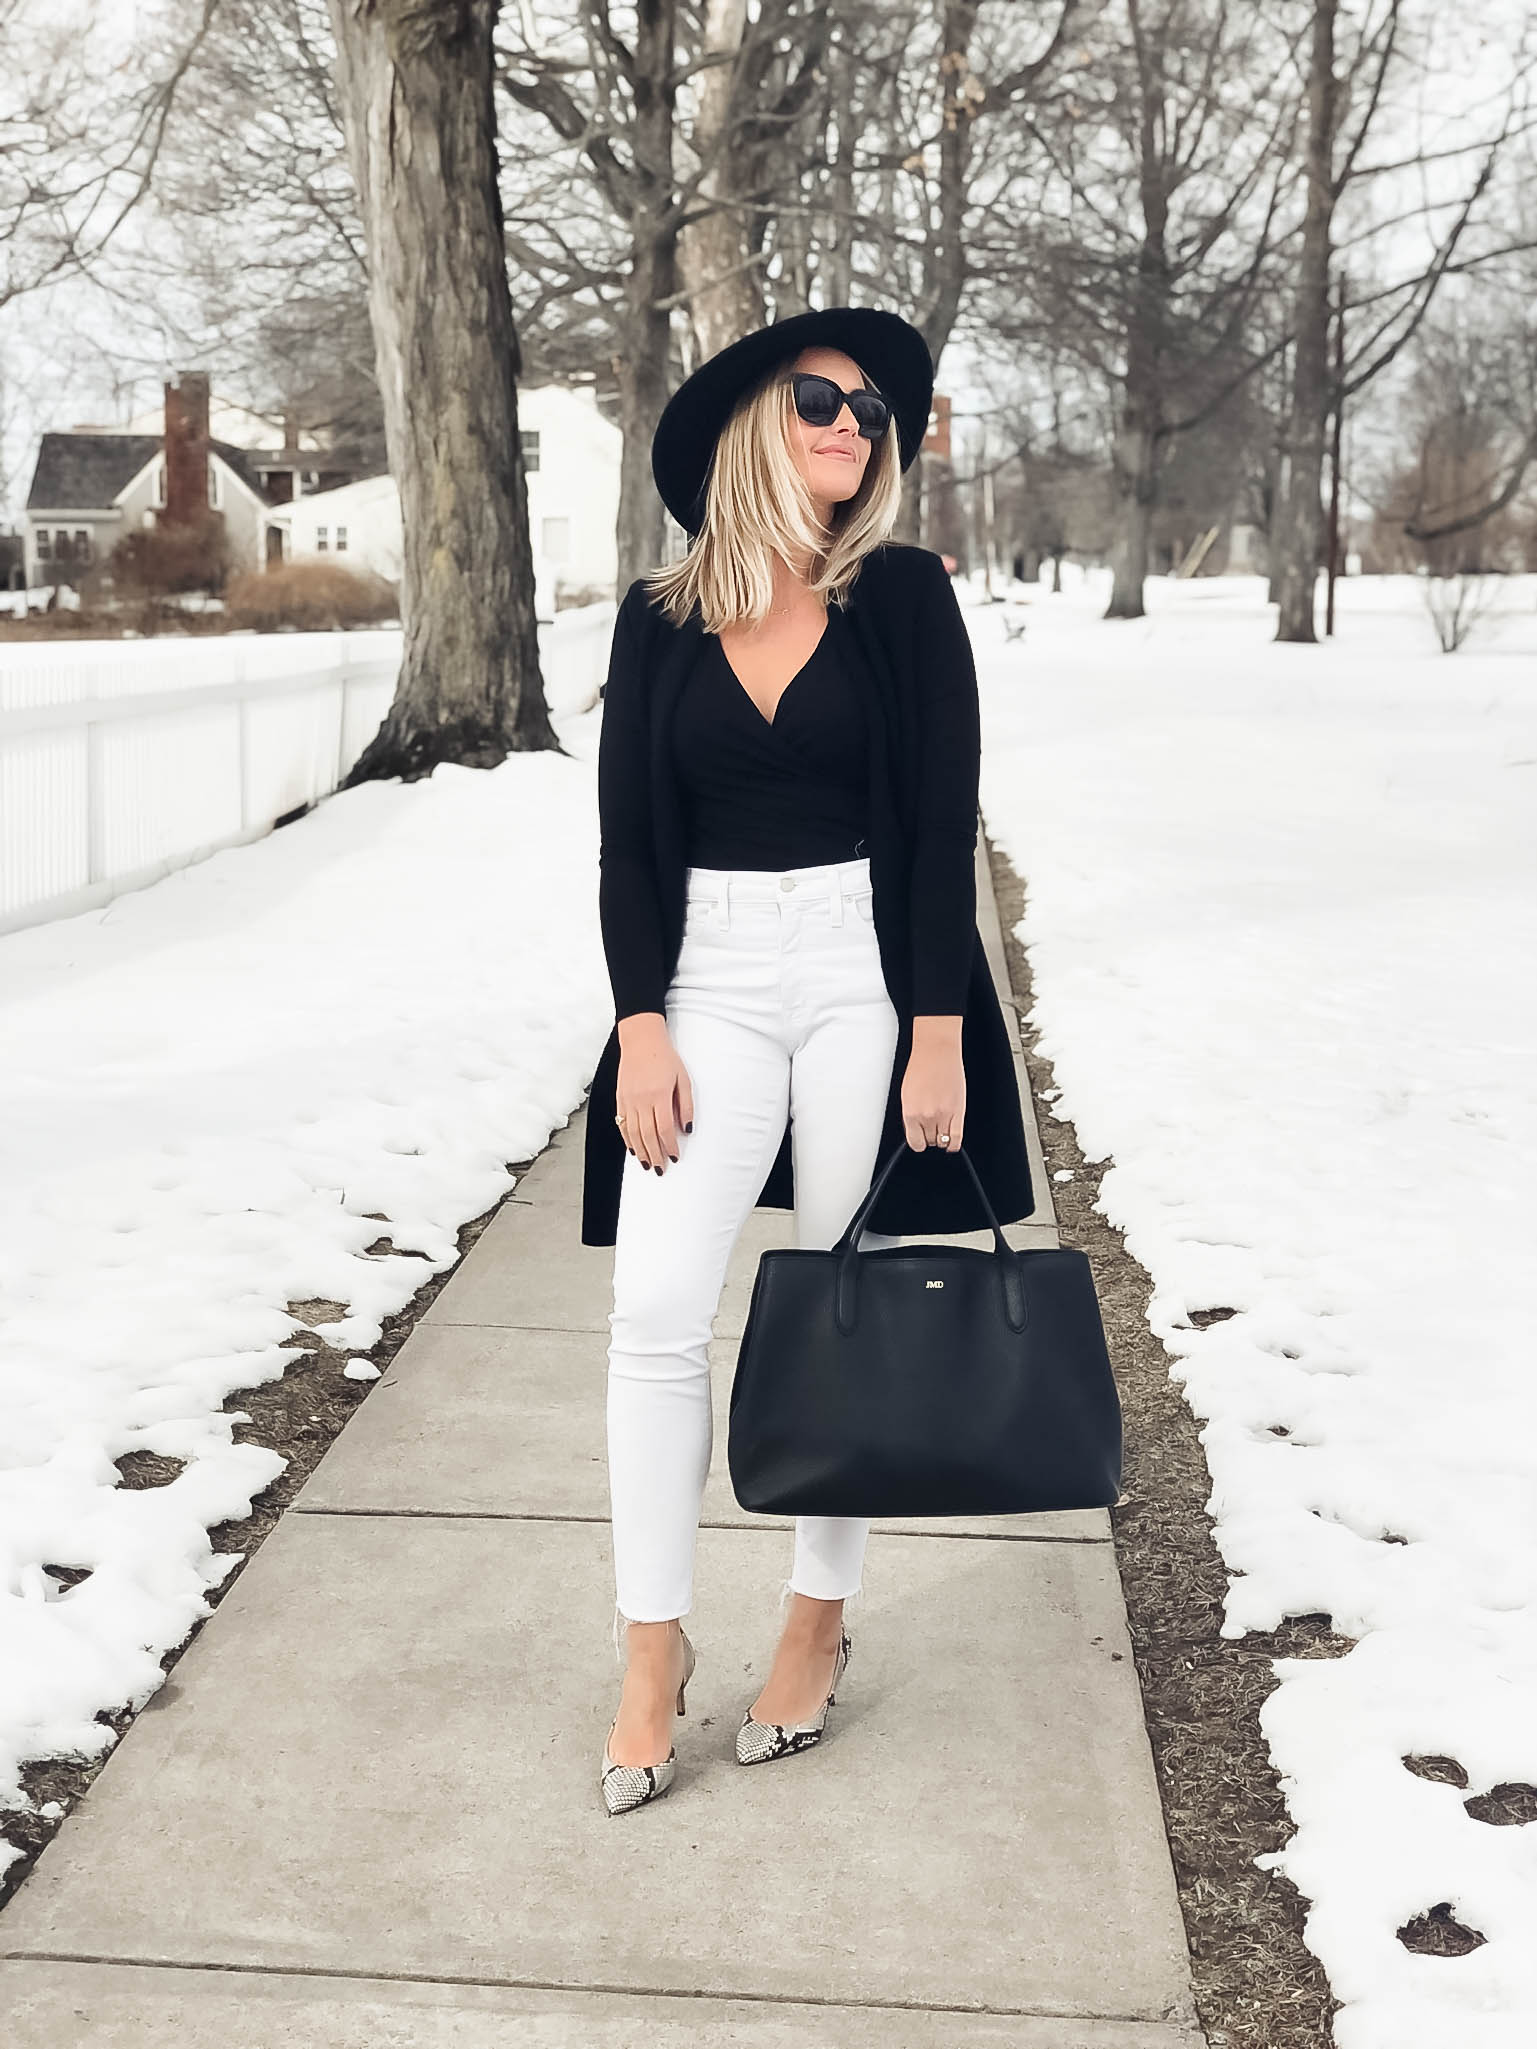 How To: Wear White Jeans in Winter